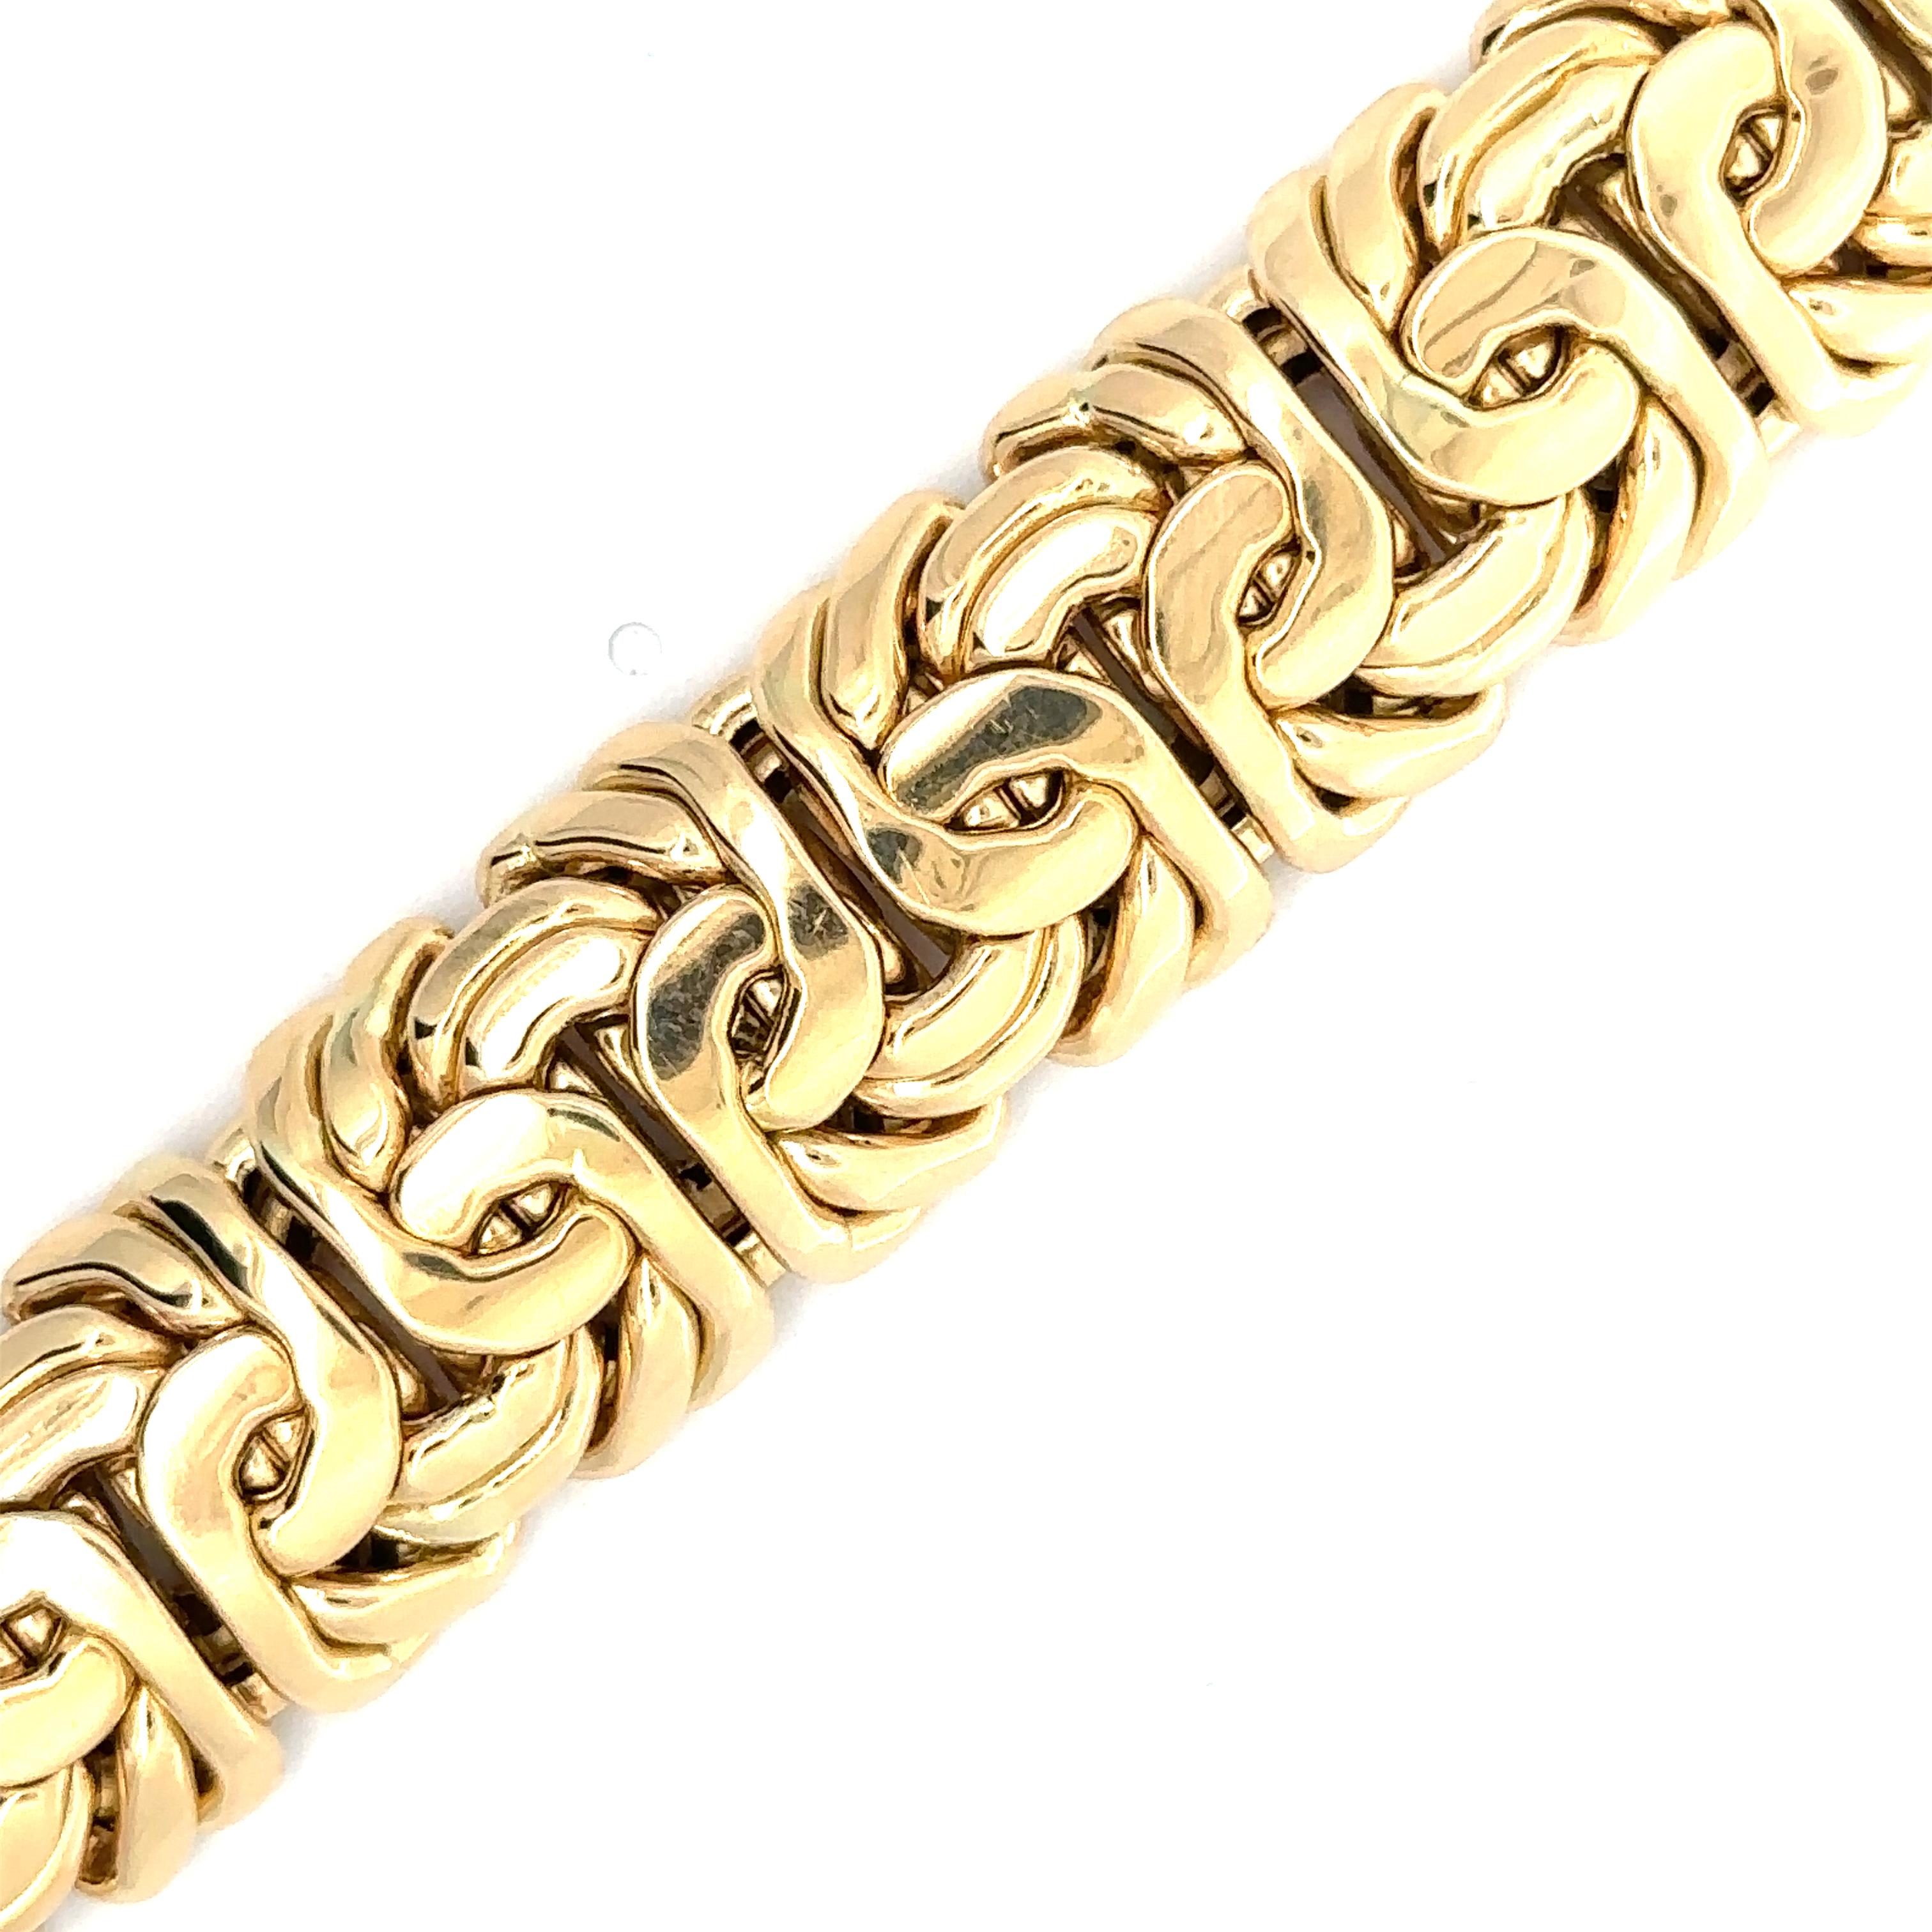 14k 7 gr yellow pure gold bracelet 7.7 inches